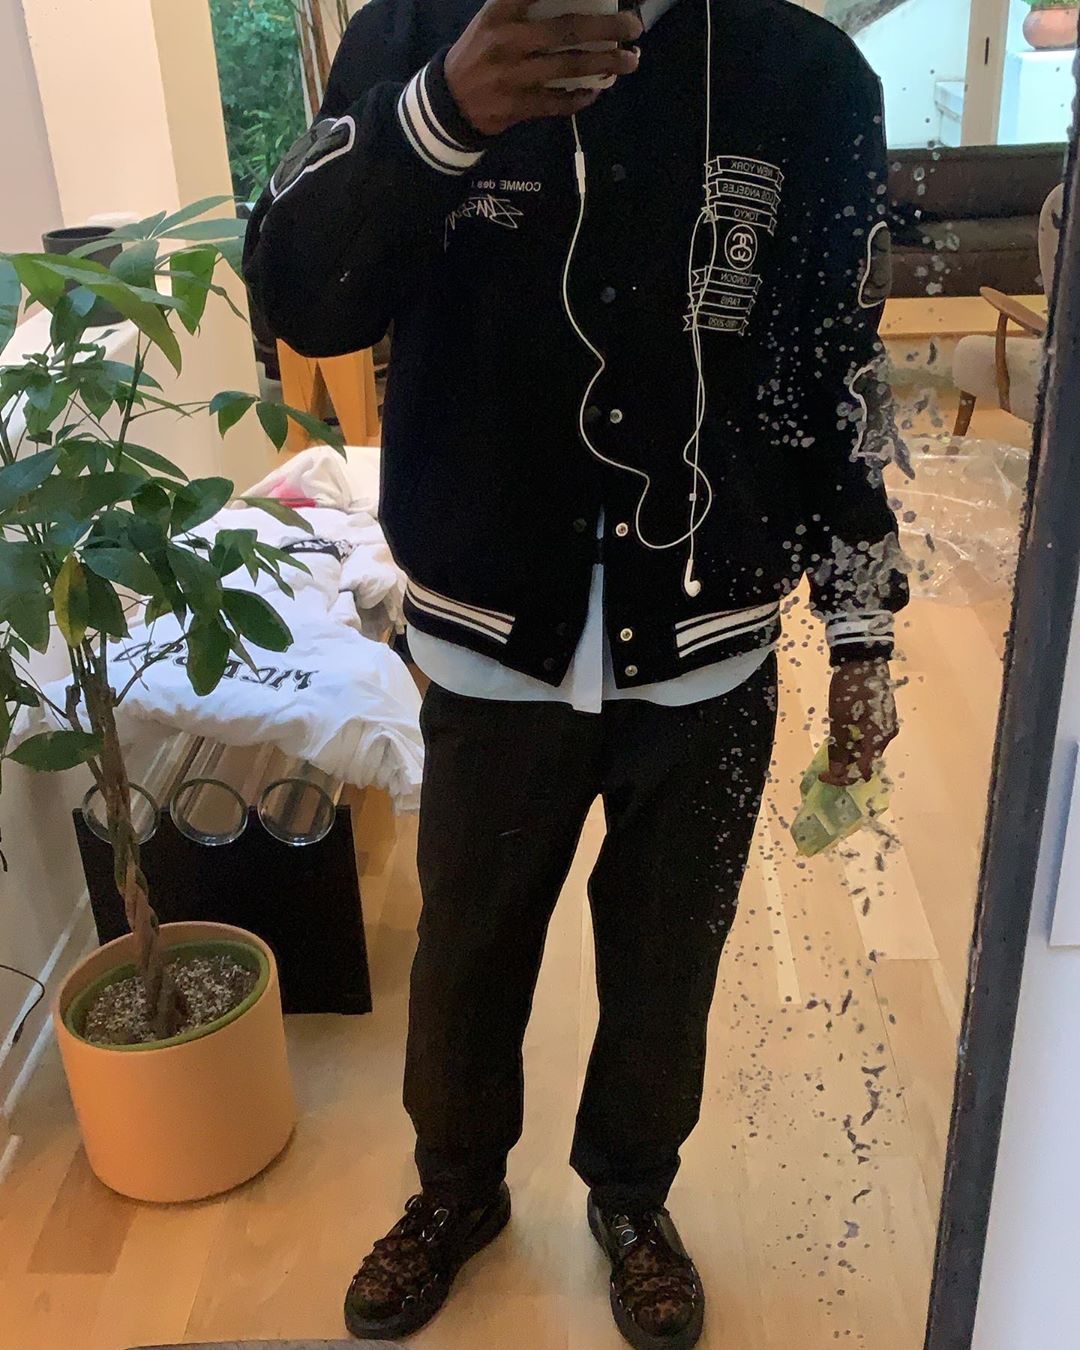 Details about   Stussy X Comme des Garcons 40th Anniversary Varsity Jacket CDG ASAP Rocky